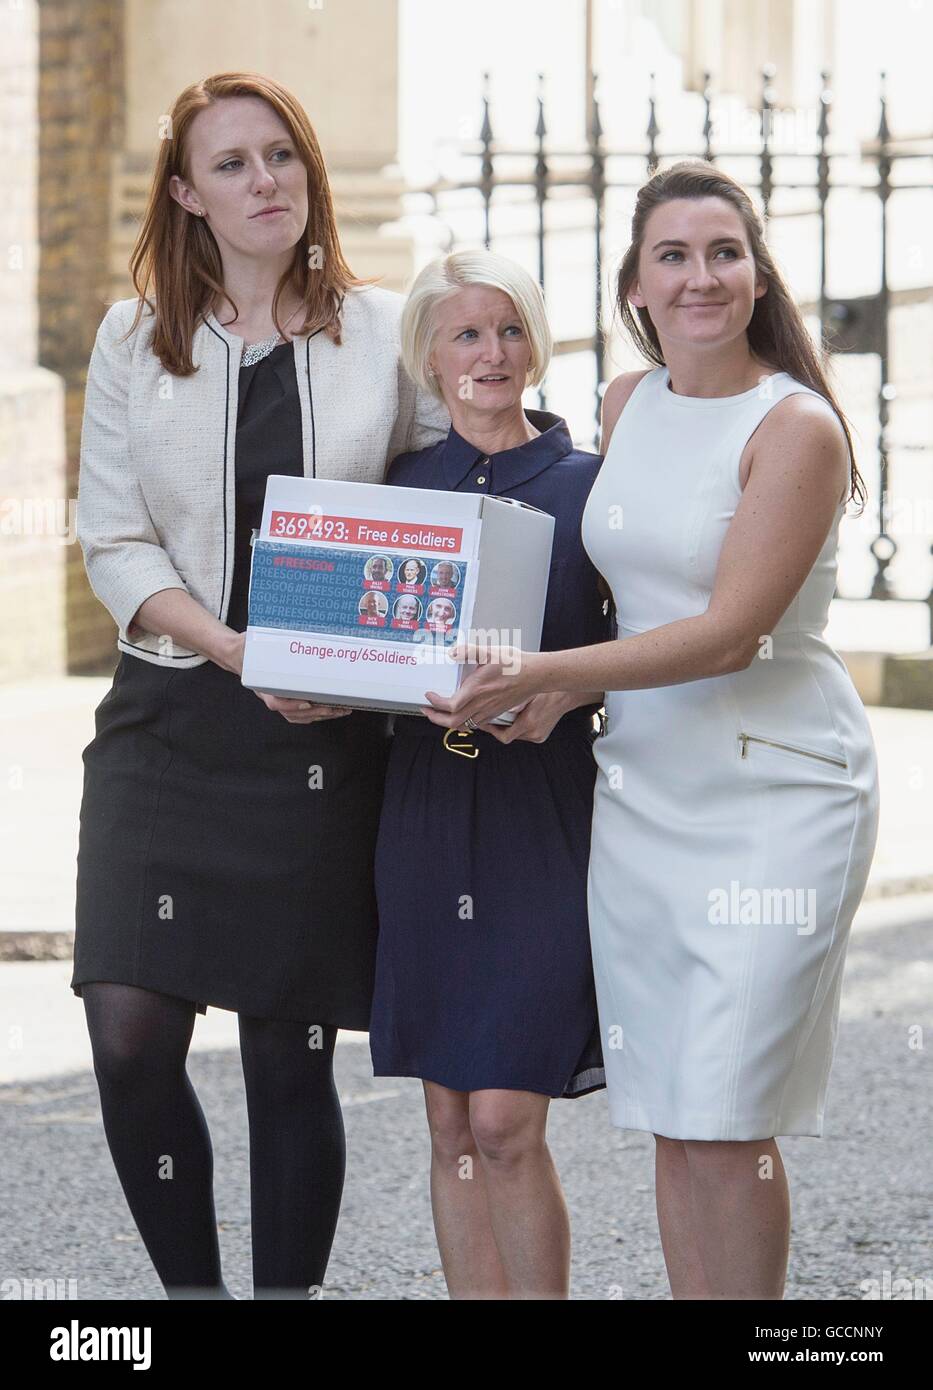 (Left to right) Joanne Thomlinson Lisa Dunn and Yvonne MacHugh present a 350,000 signature petition to Downing Street for the release of several British men who have been held in jail in India for firearms charges for the last 1000 days. Stock Photo